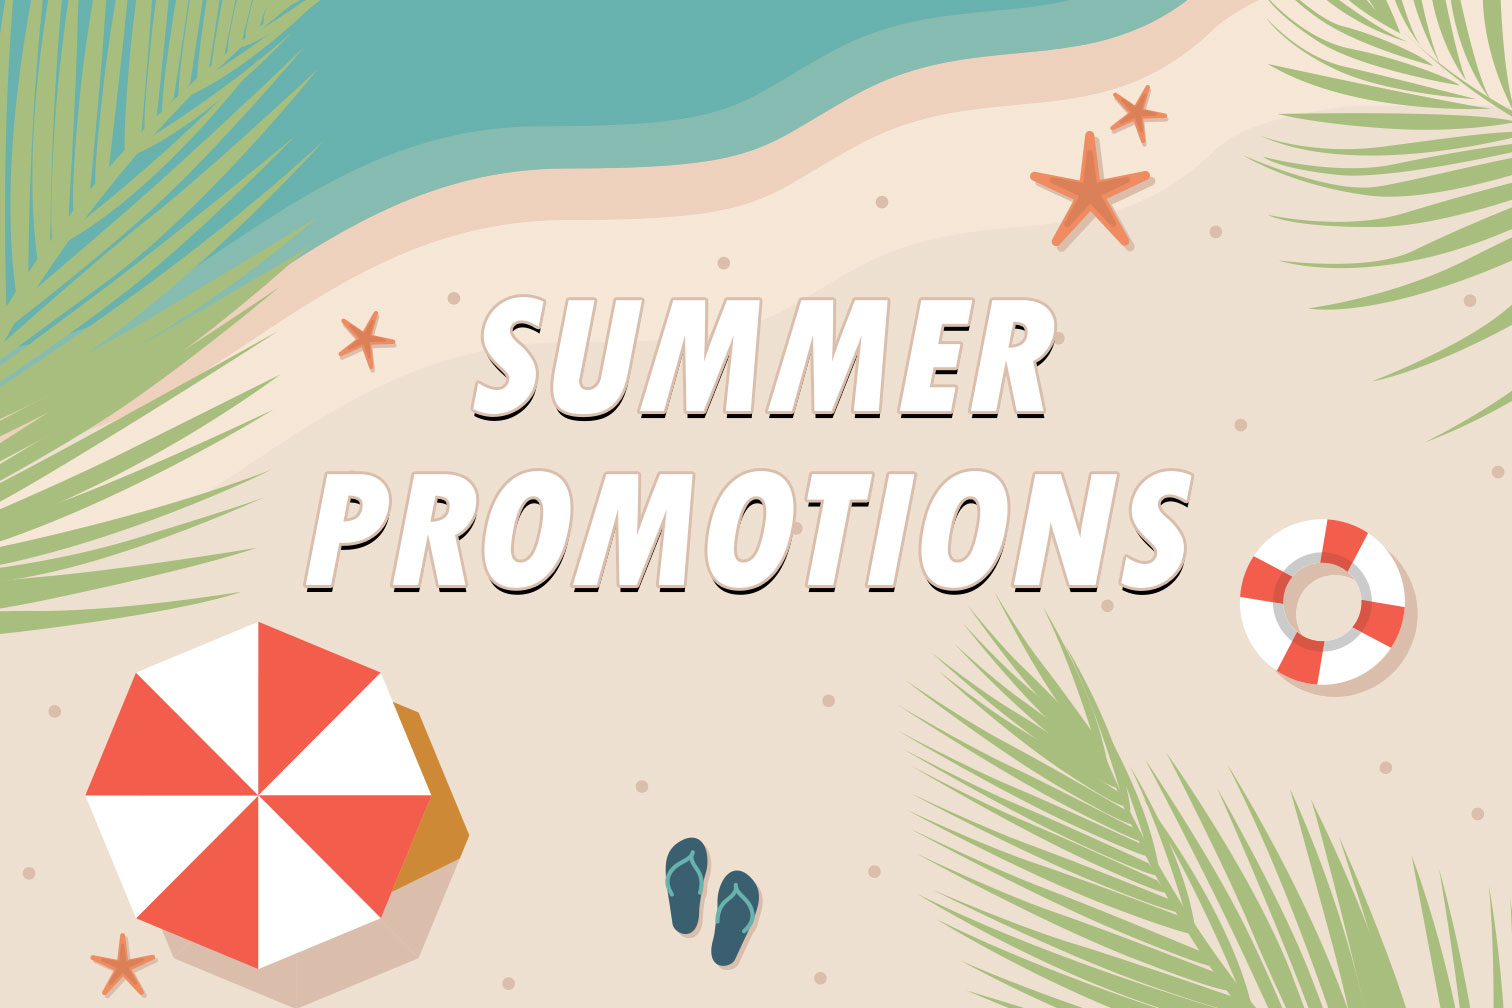 Turn Up The Heat With A Summer Promotion!